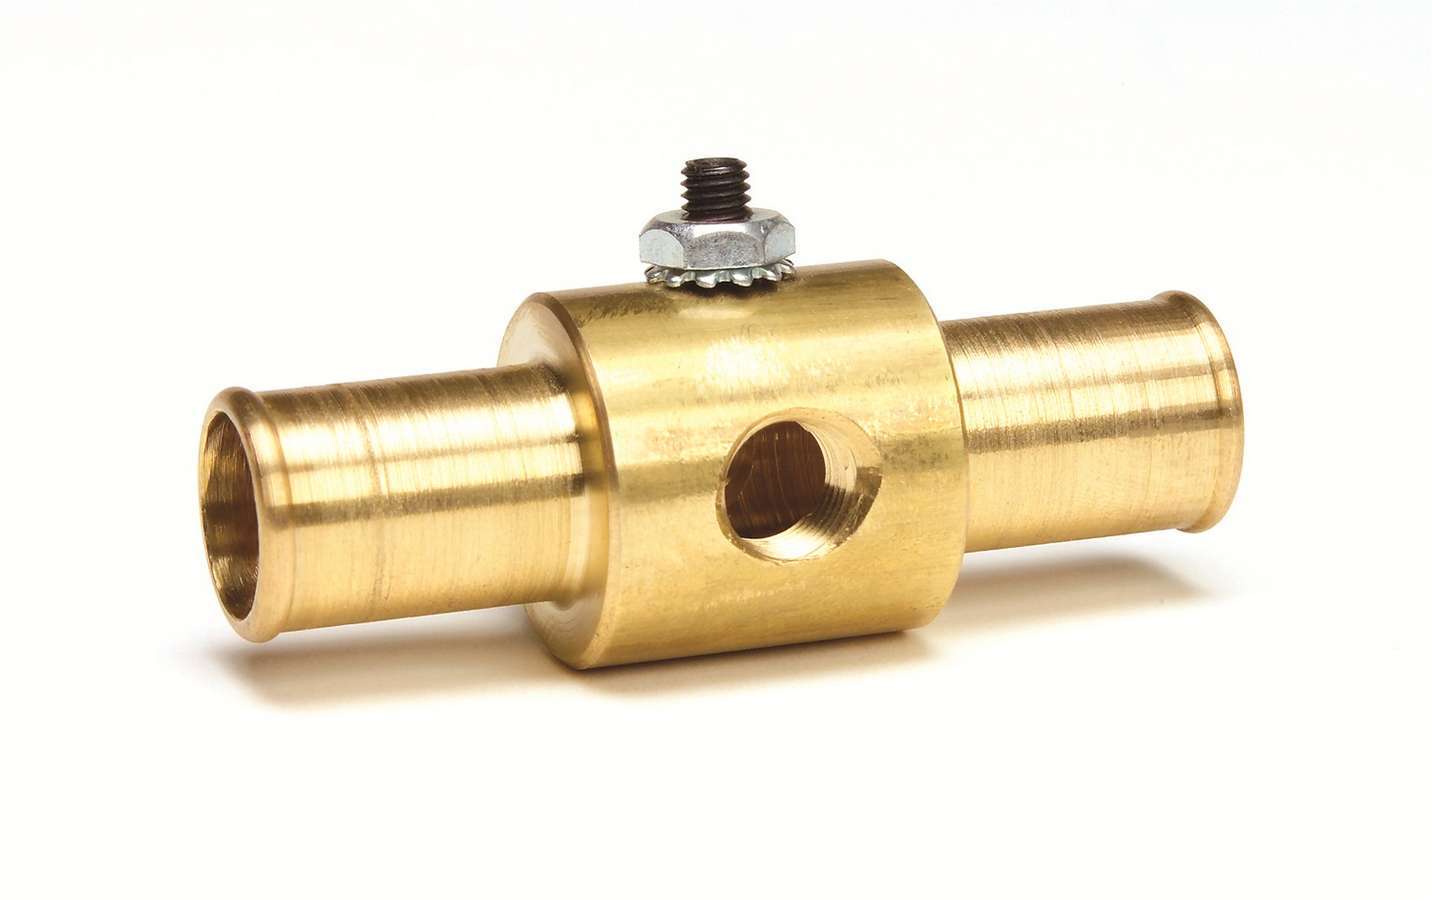 Auto Meter Fitting, Gauge Adapter, Straight, 3/4" Hose Barb to 3/4" Hose Barb, 1/8" NPT Gauge Port, Brass, Natural, Temperature